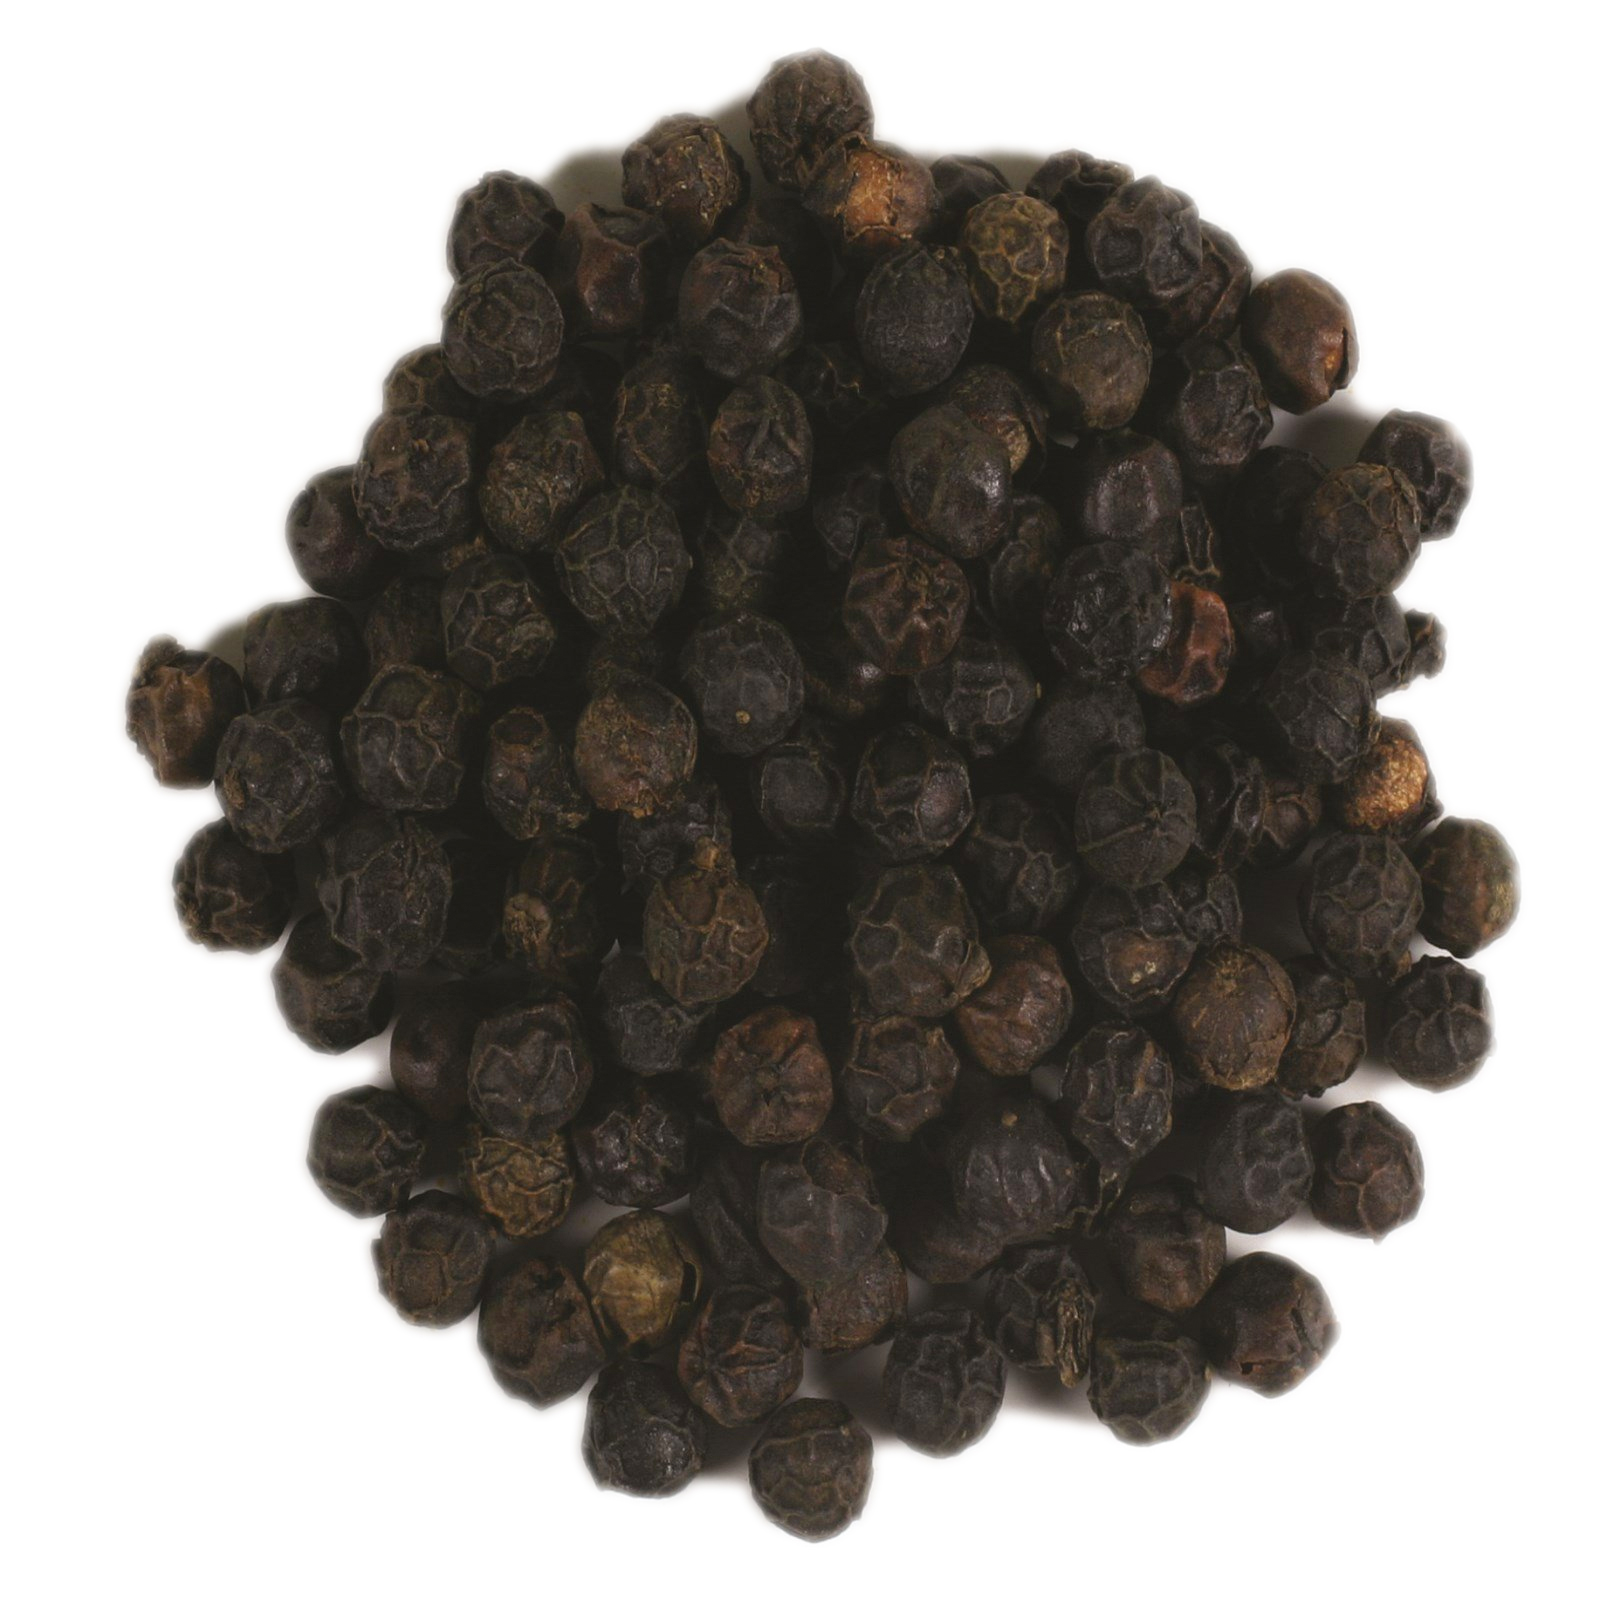 Frontier Co-op Whole Black Peppercorns, Spices, 16 oz. - image 1 of 7